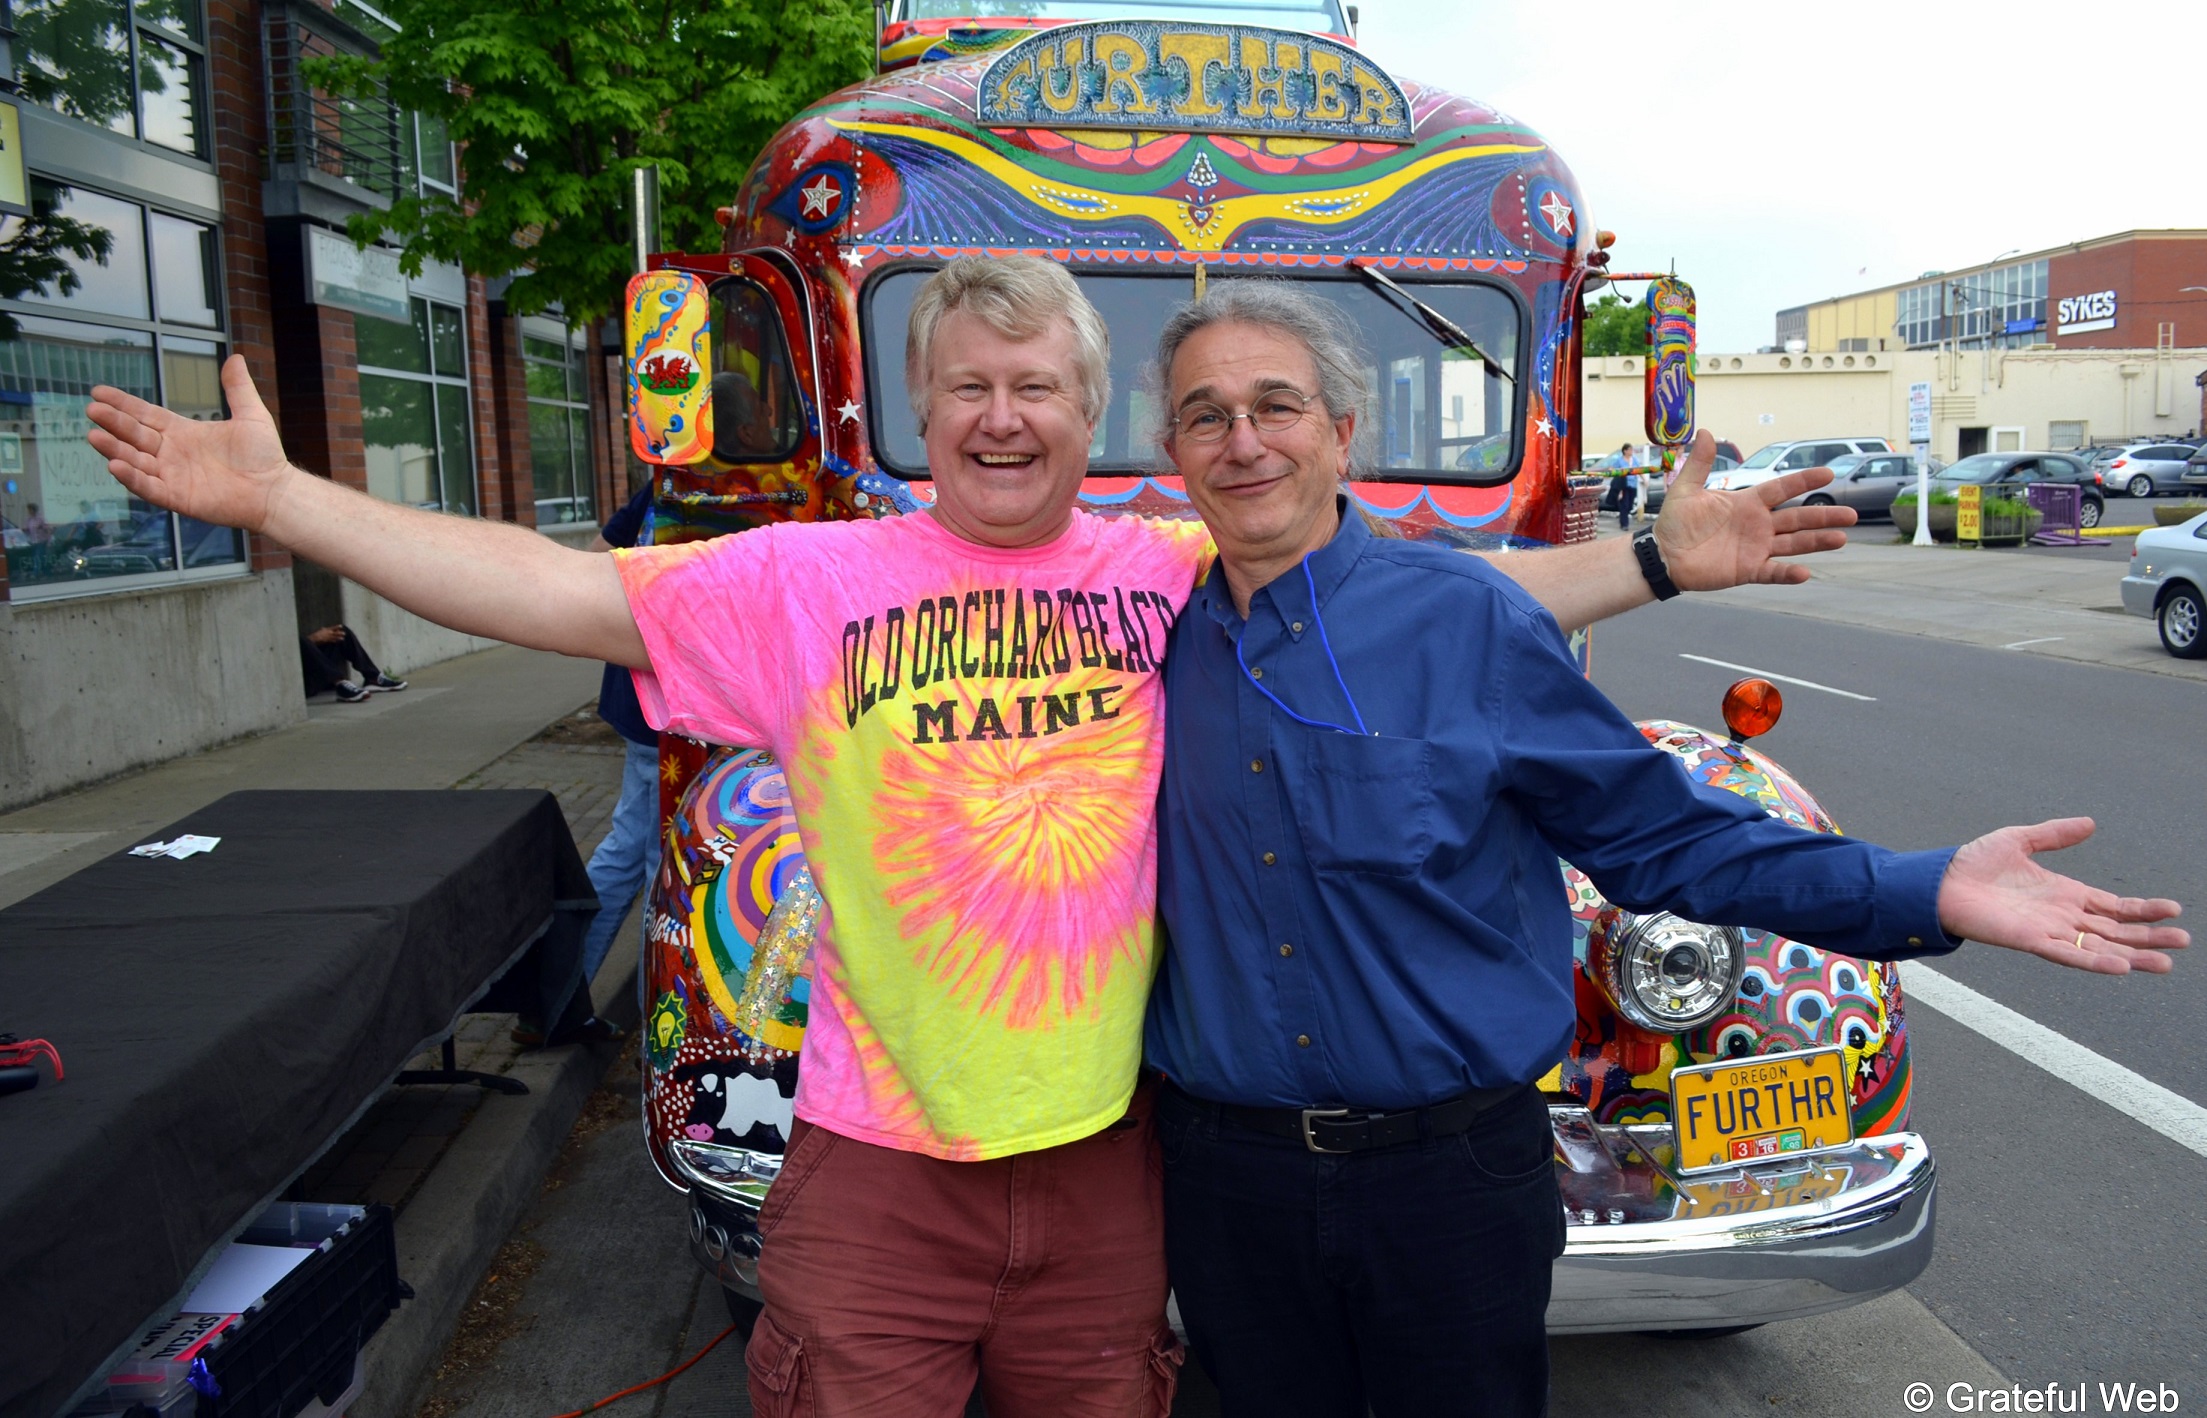 Gans in front of the Furthur Bus